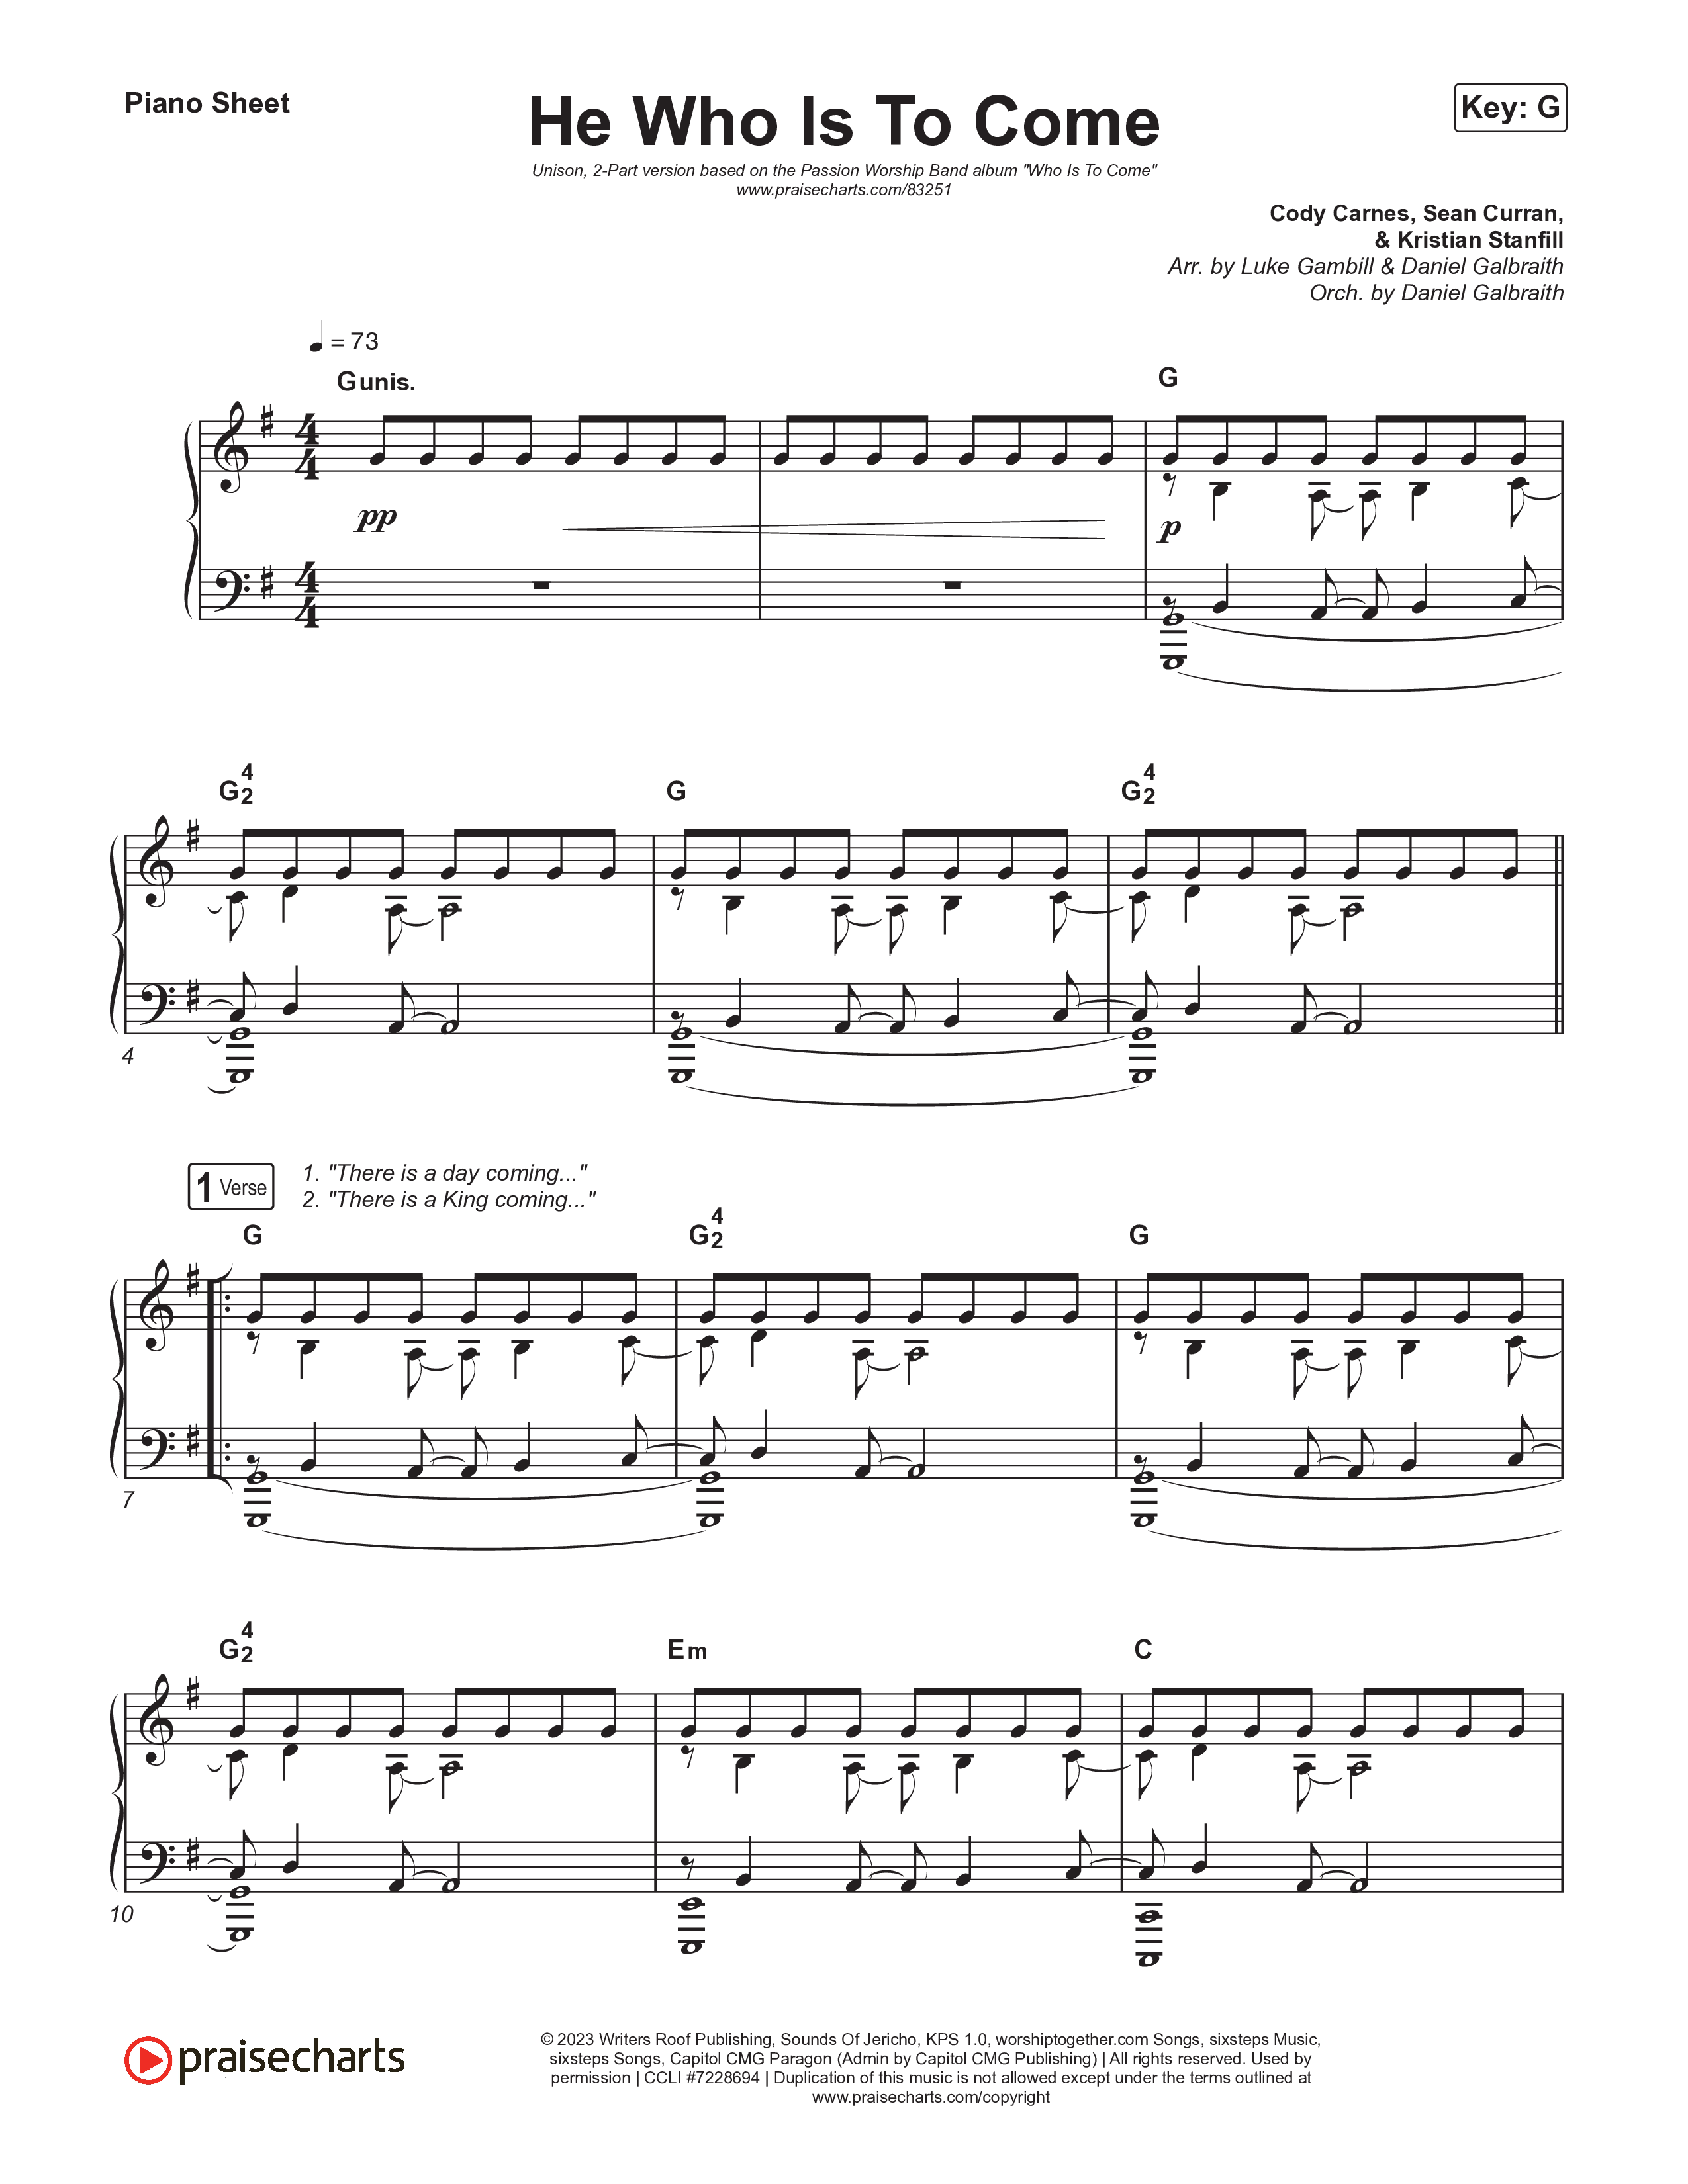 He Who Is To Come (Unison/2-Part) Piano Sheet (Passion / Cody Carnes / Kristian Stanfill / Arr. Luke Gambill)